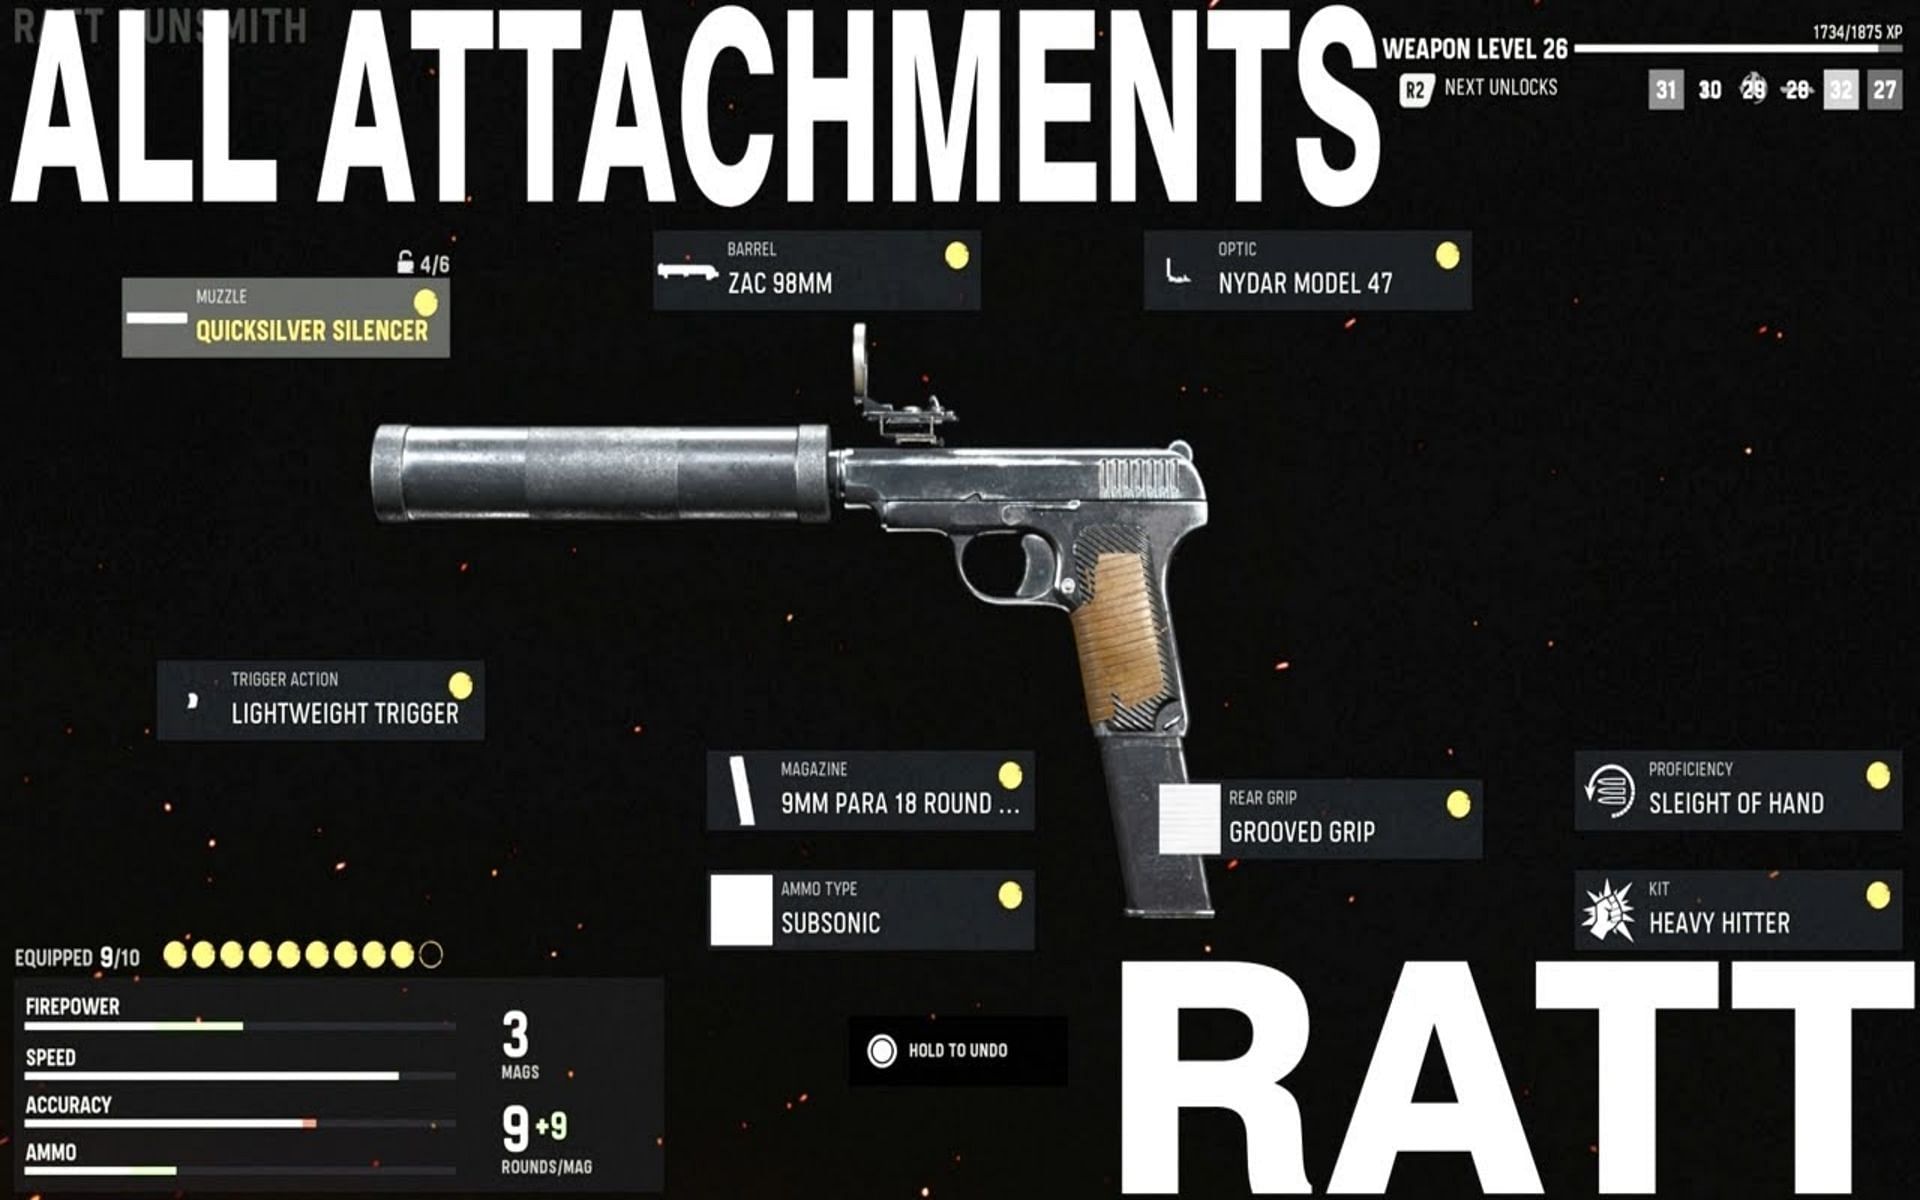 The Ratt has low damage output compared to the other pistols in Call of Duty: Vanguard (Image via Destroyerfield51)